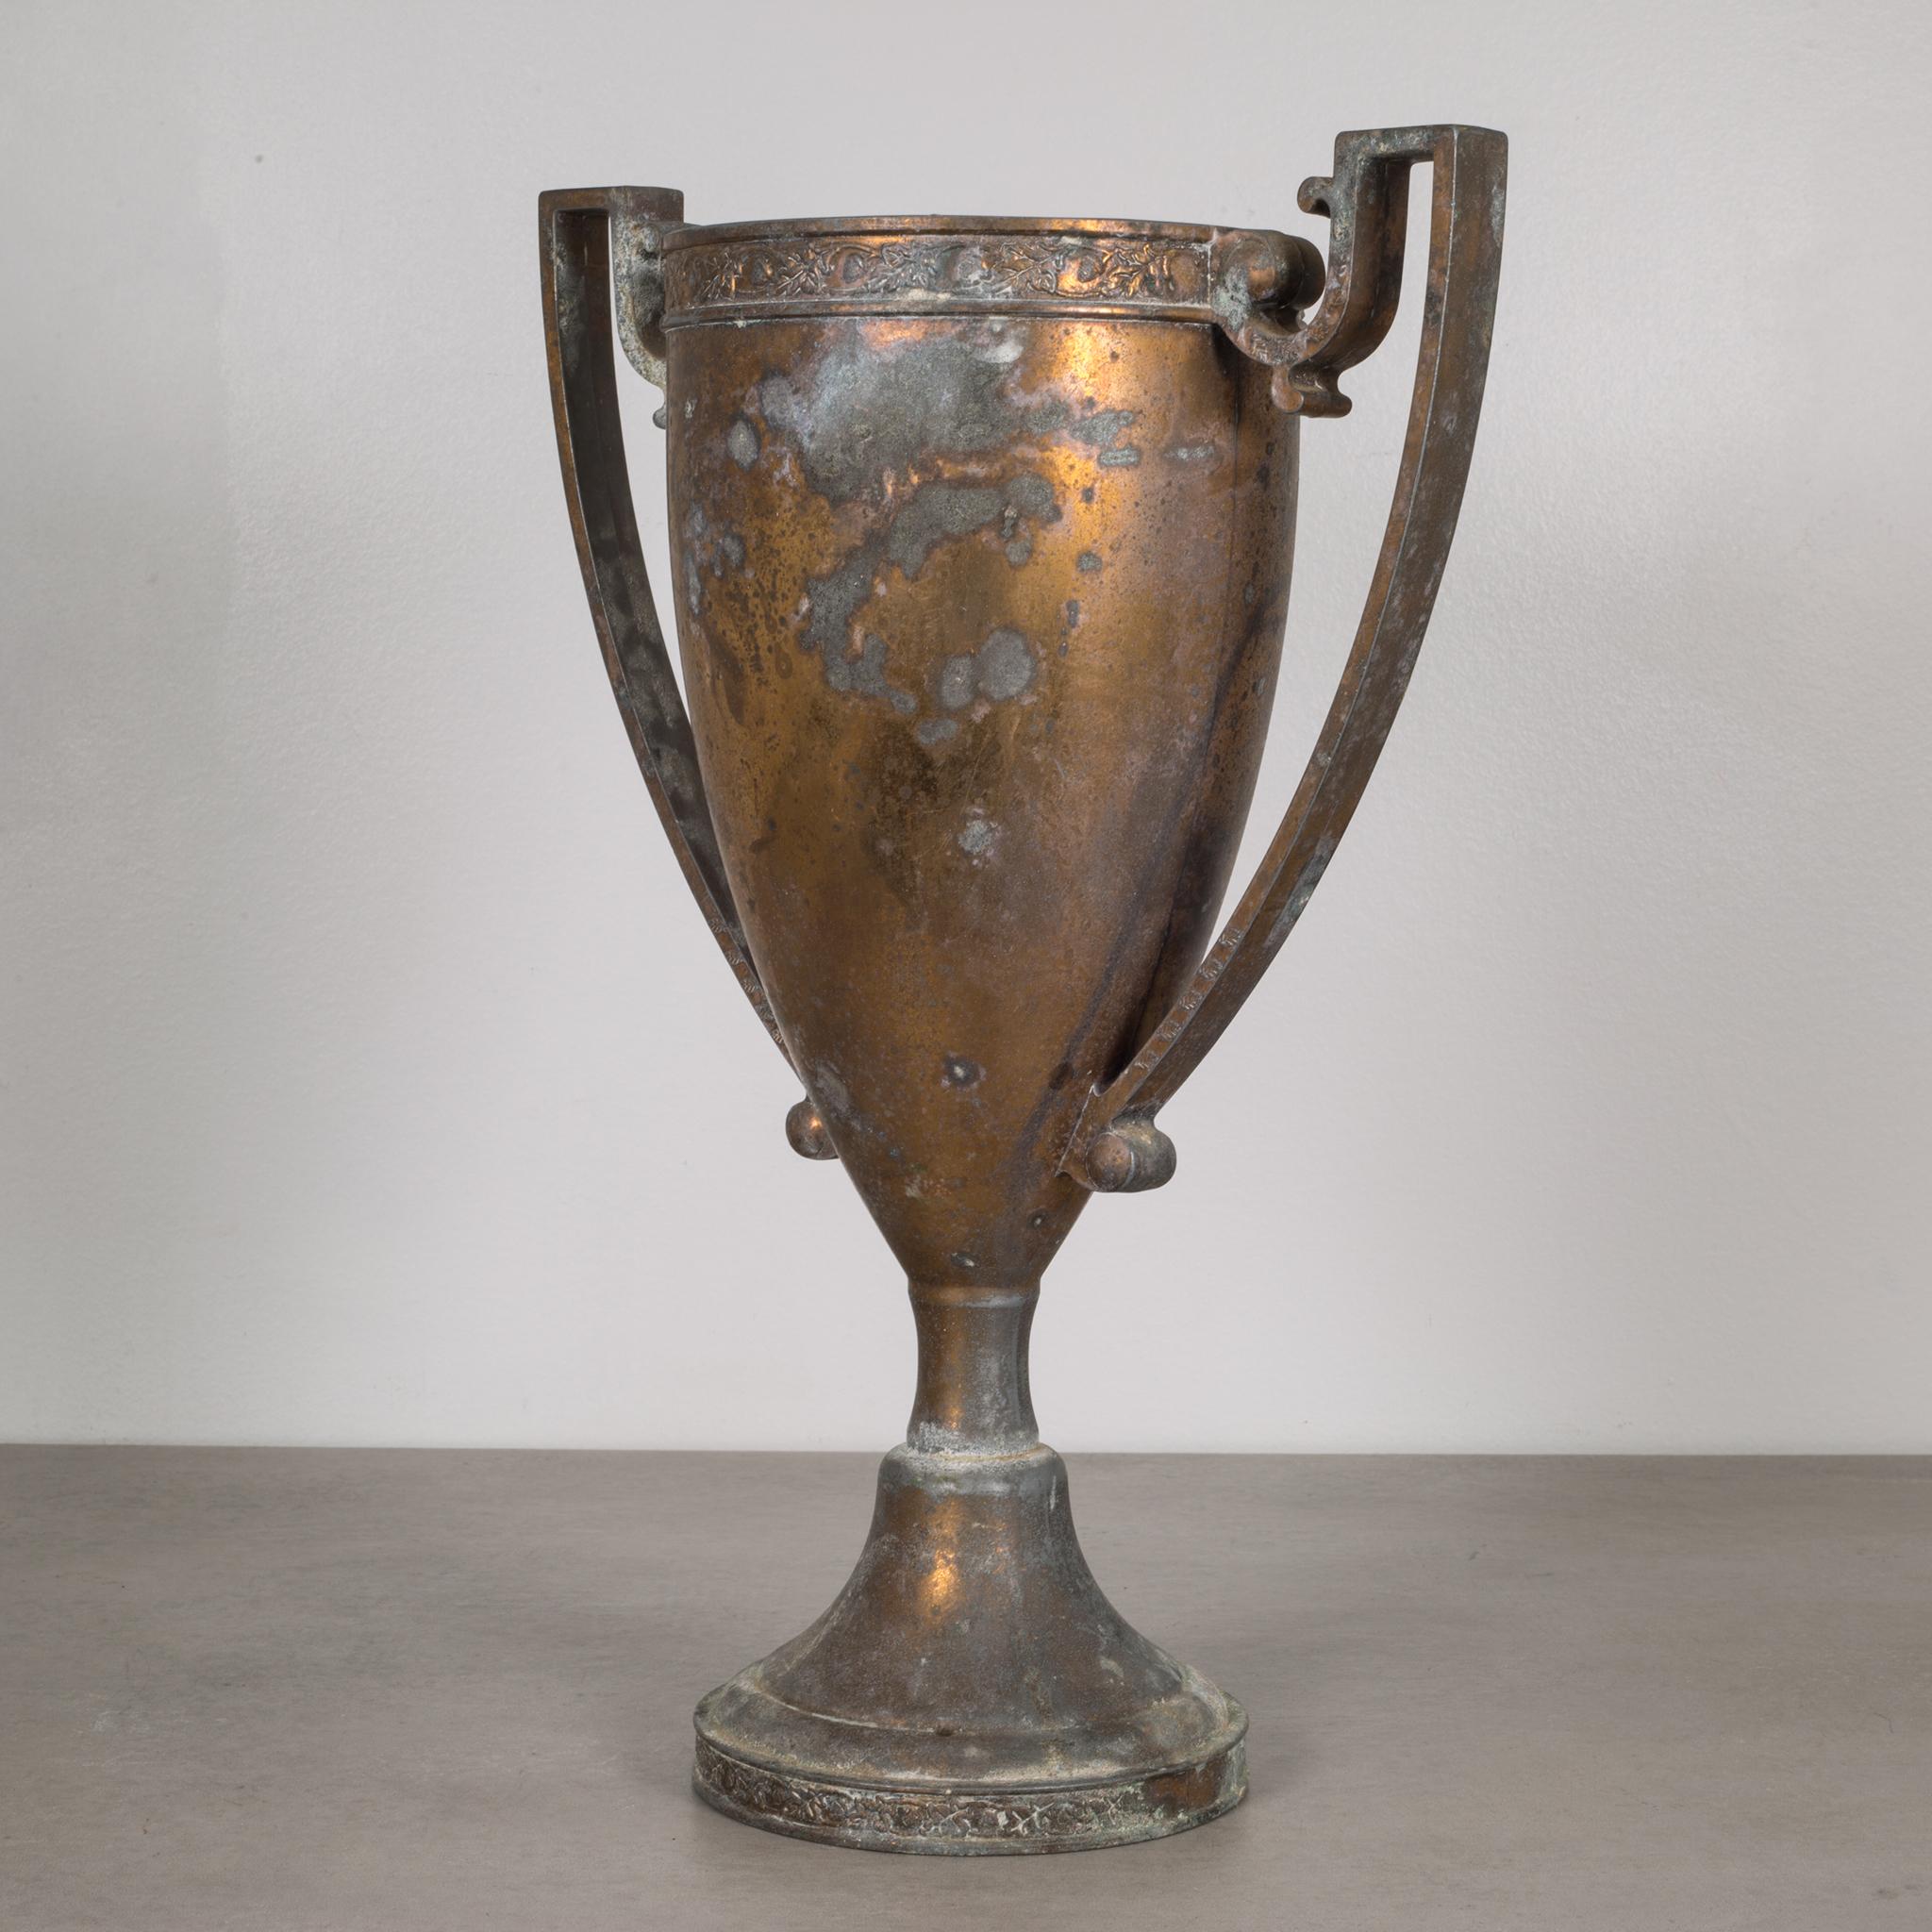 About

This is an original solid bronze loving cup trophy marked Dodge Inc. on the bottom. The distressed trophy has decorative leaves on the top, bottom and arms. The heavily patinated trophy has retained some of its original color with minor